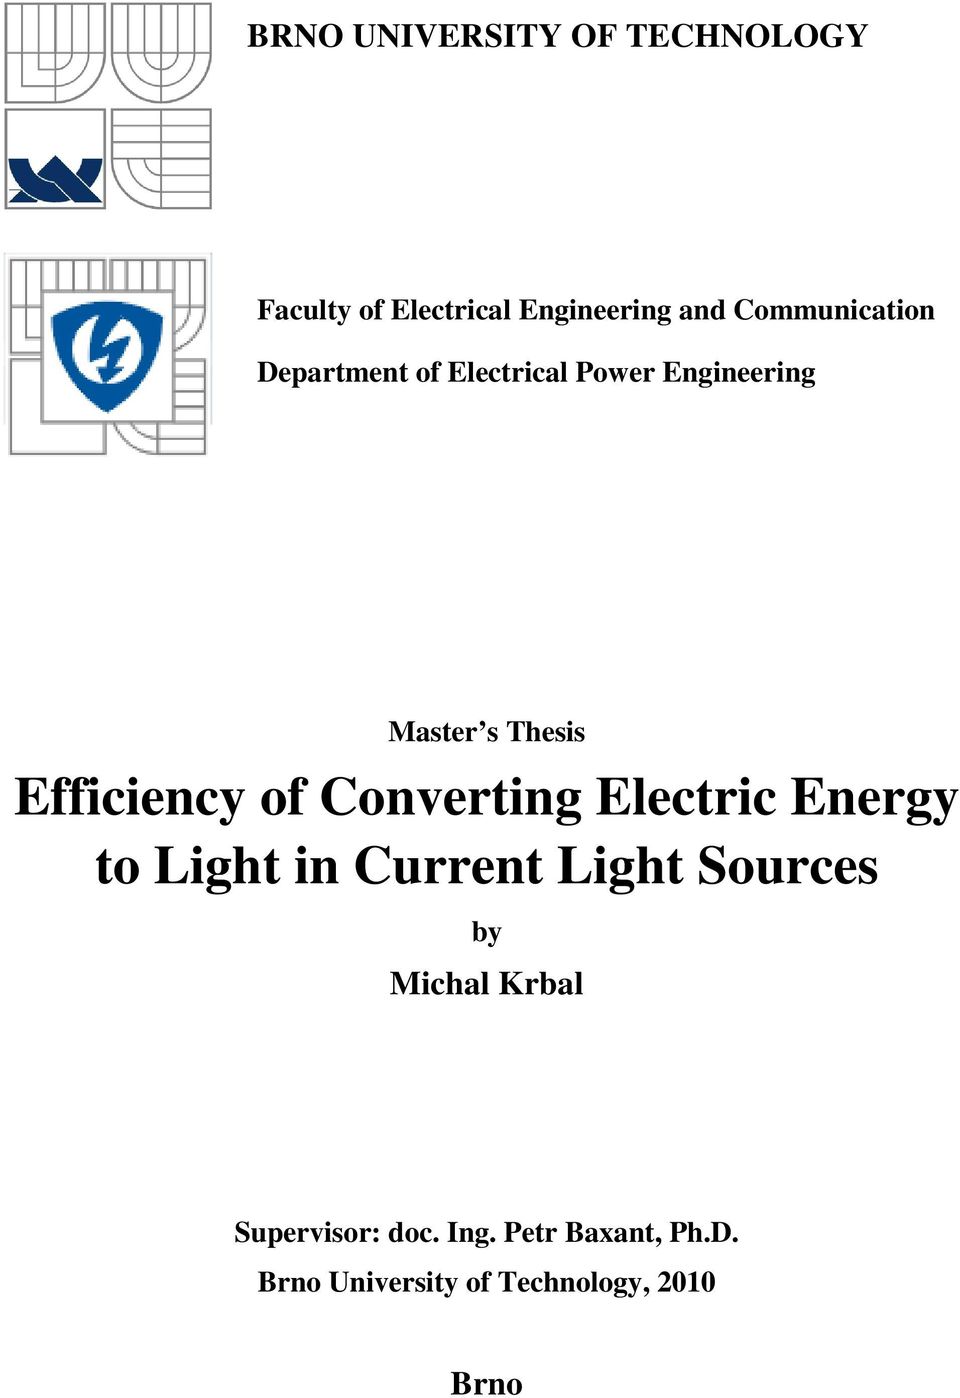 Efficiency of Converting Electric Energy to Light in Current Light Sources by